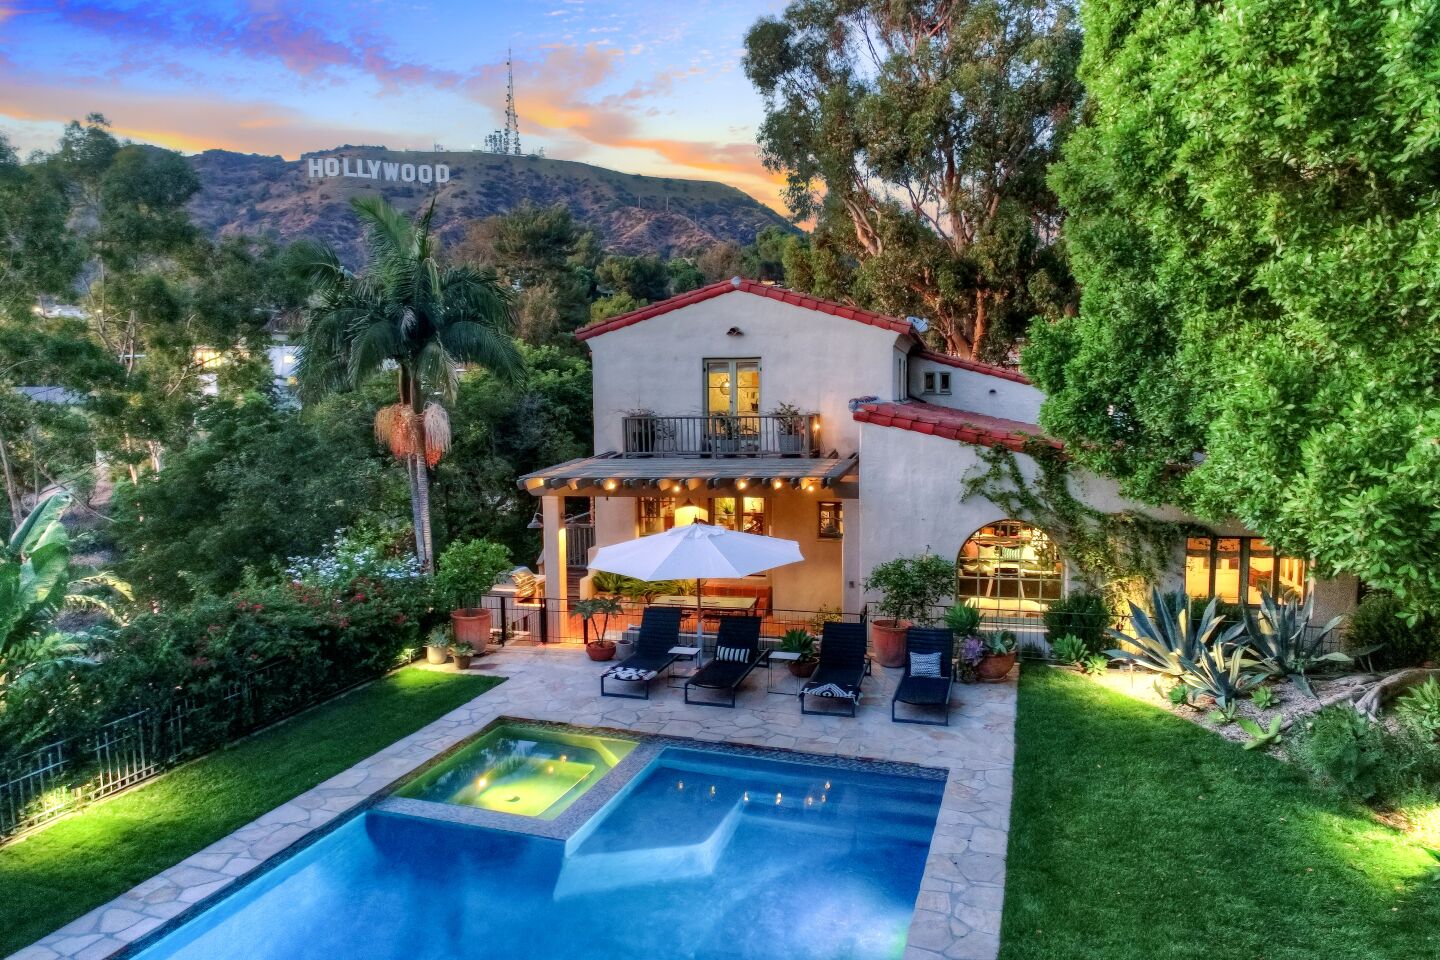 Commercial director Renny Maslow and his wife, stylist Erica Maslow, are asking $4.537 million for their Beachwood Canyon home, which has views of the Hollywood sign.